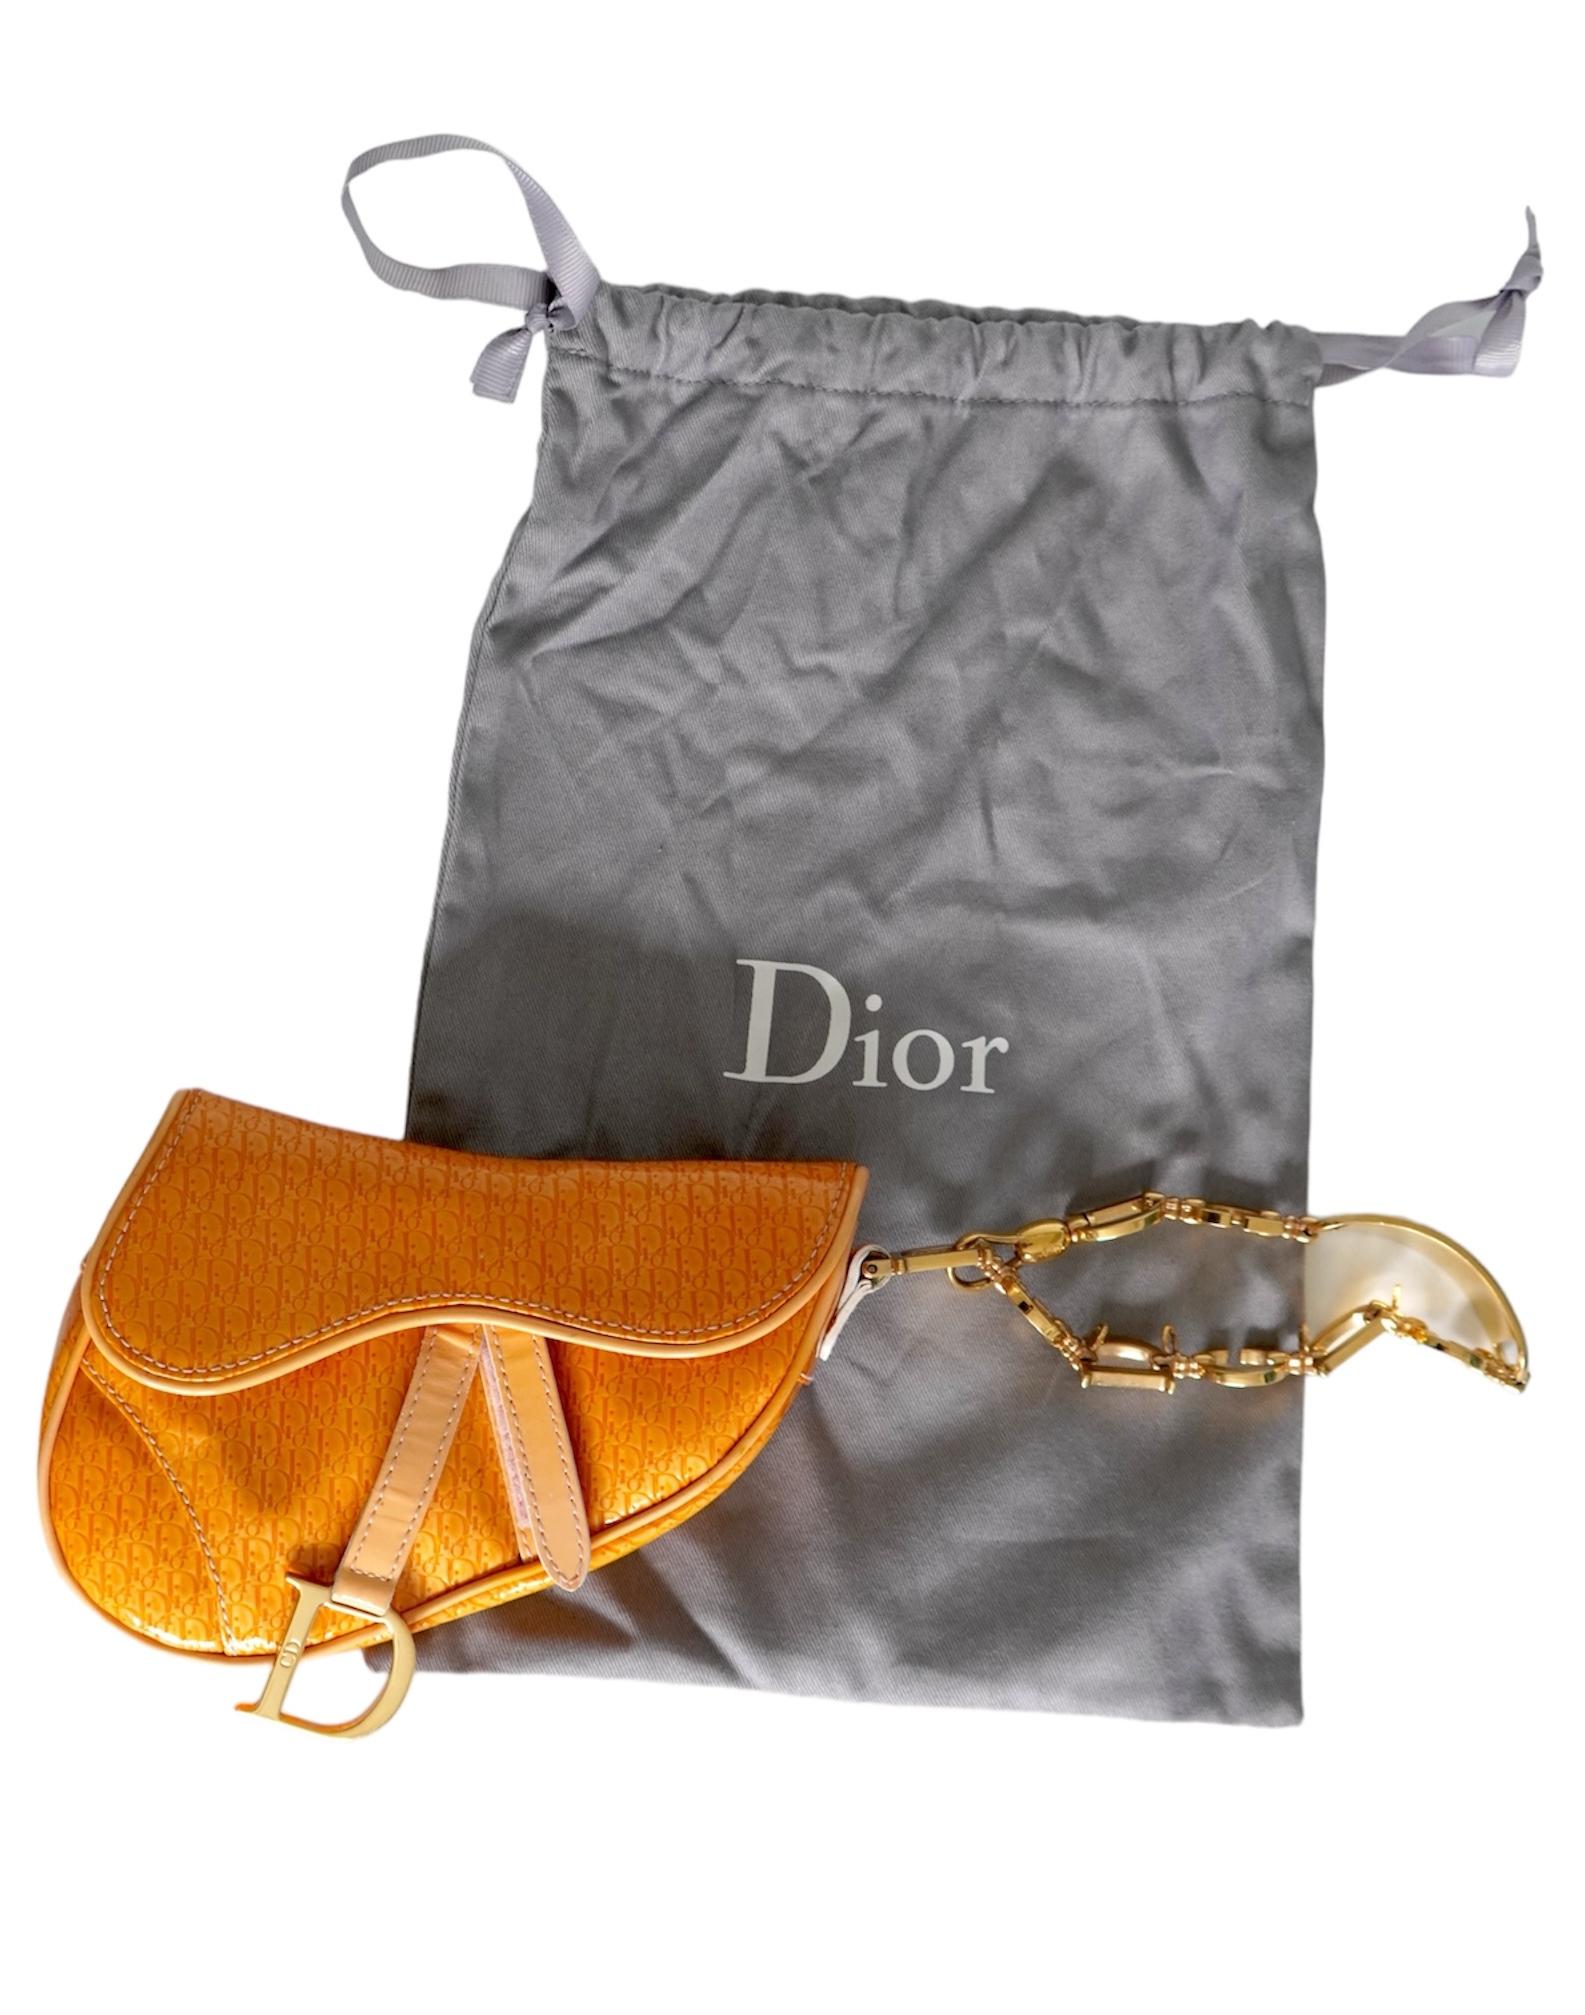 Dior Saddle Bag Yellow & Orange Monogram Patent Leather 
Velcro closure
Gold-tone hardware
Single compartment
Inner pocket
Christian Dior embossed leather logo tag
Sold with dust bag